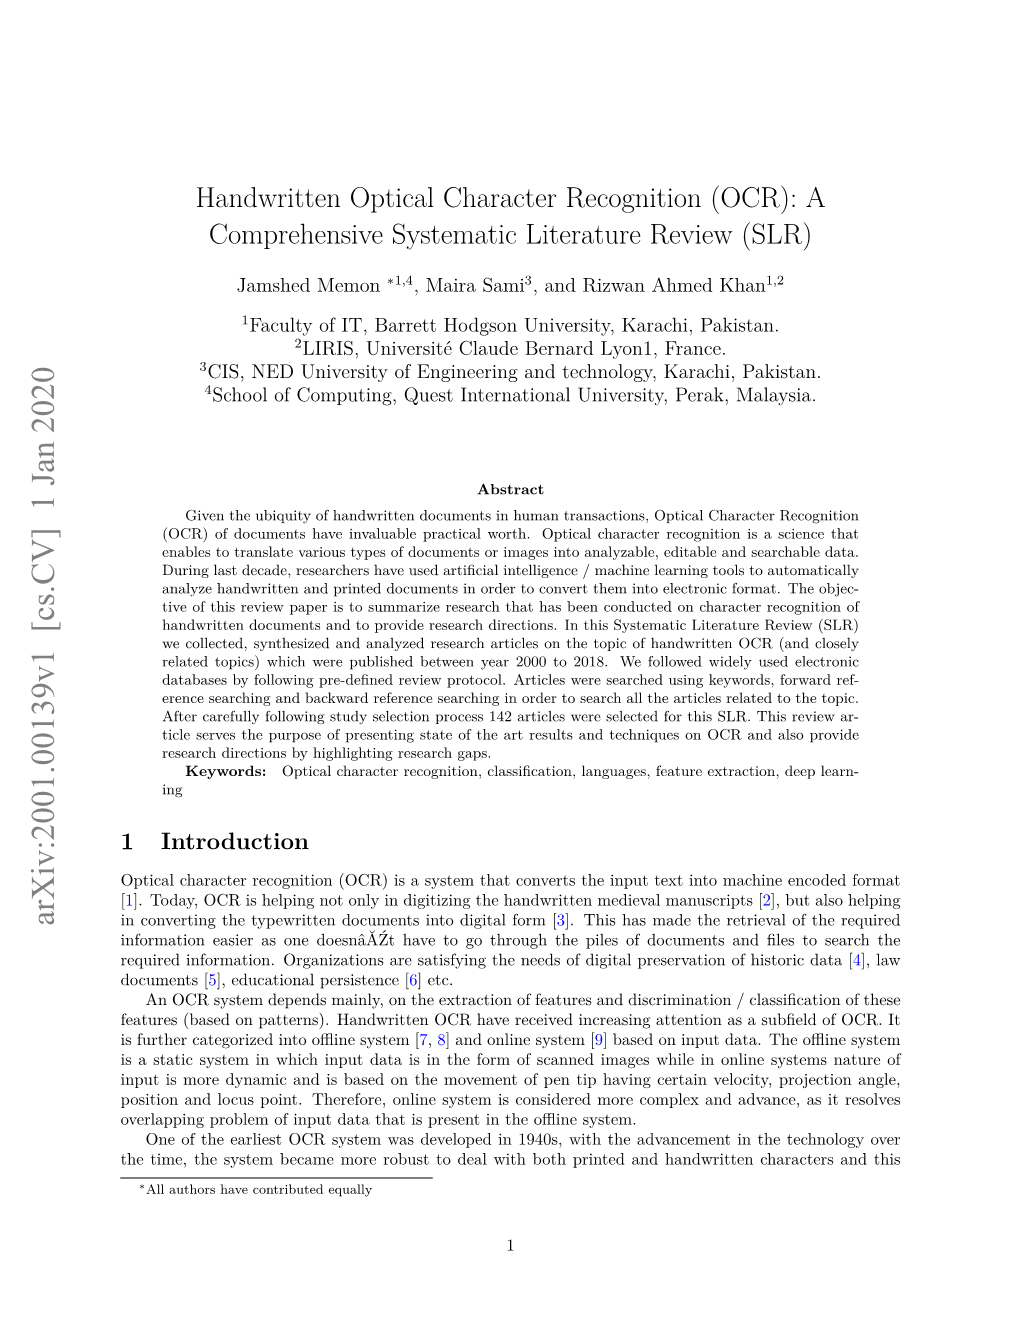 Handwritten Optical Character Recognition (OCR): a Comprehensive Systematic Literature Review (SLR)